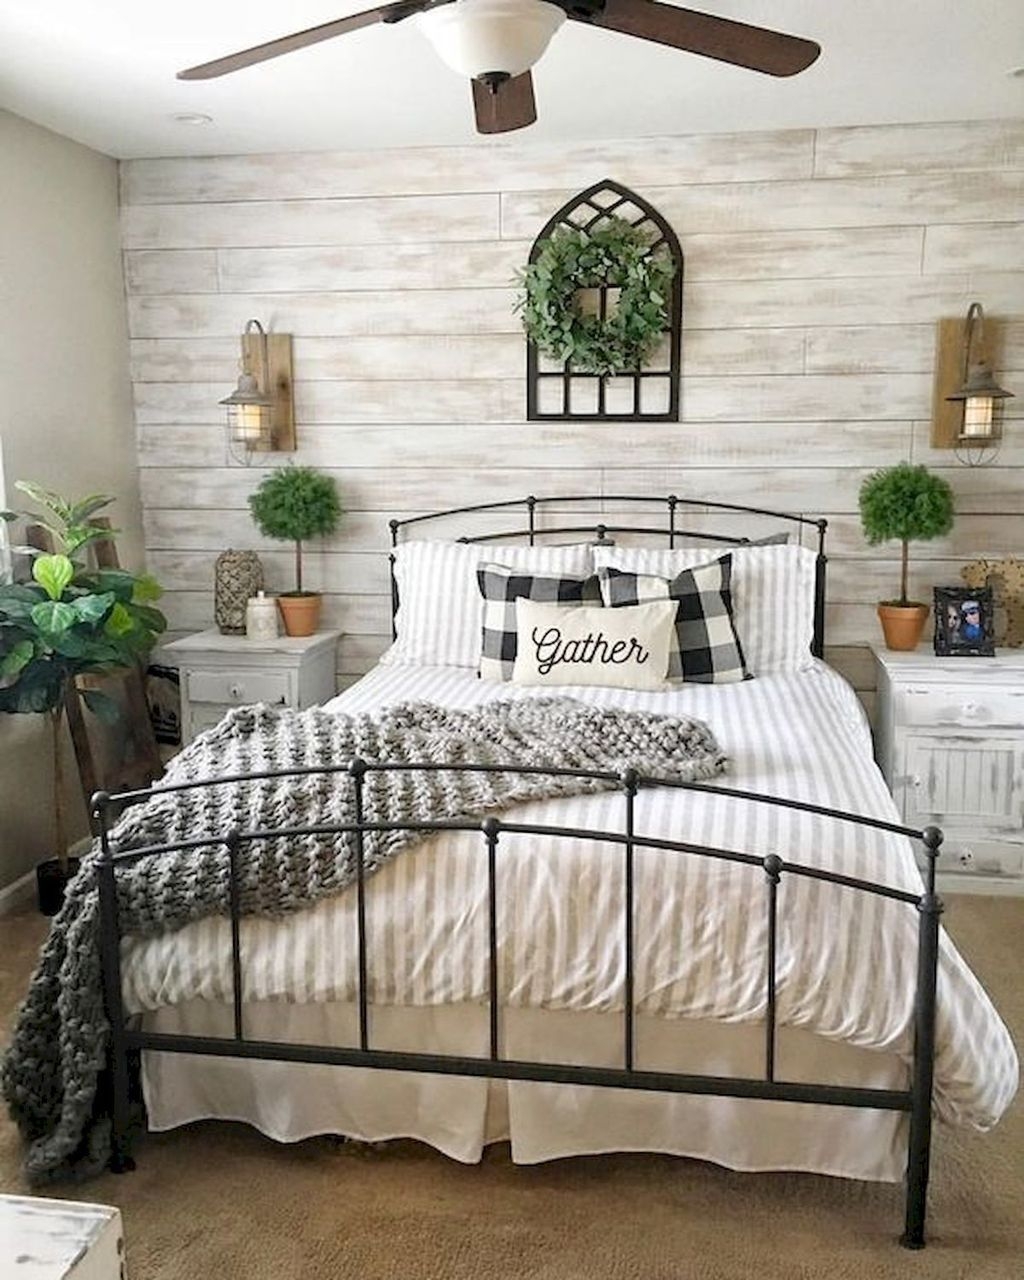 Gorgeous Farmhouse Bedroom Remodel Ideas On A Budget 08